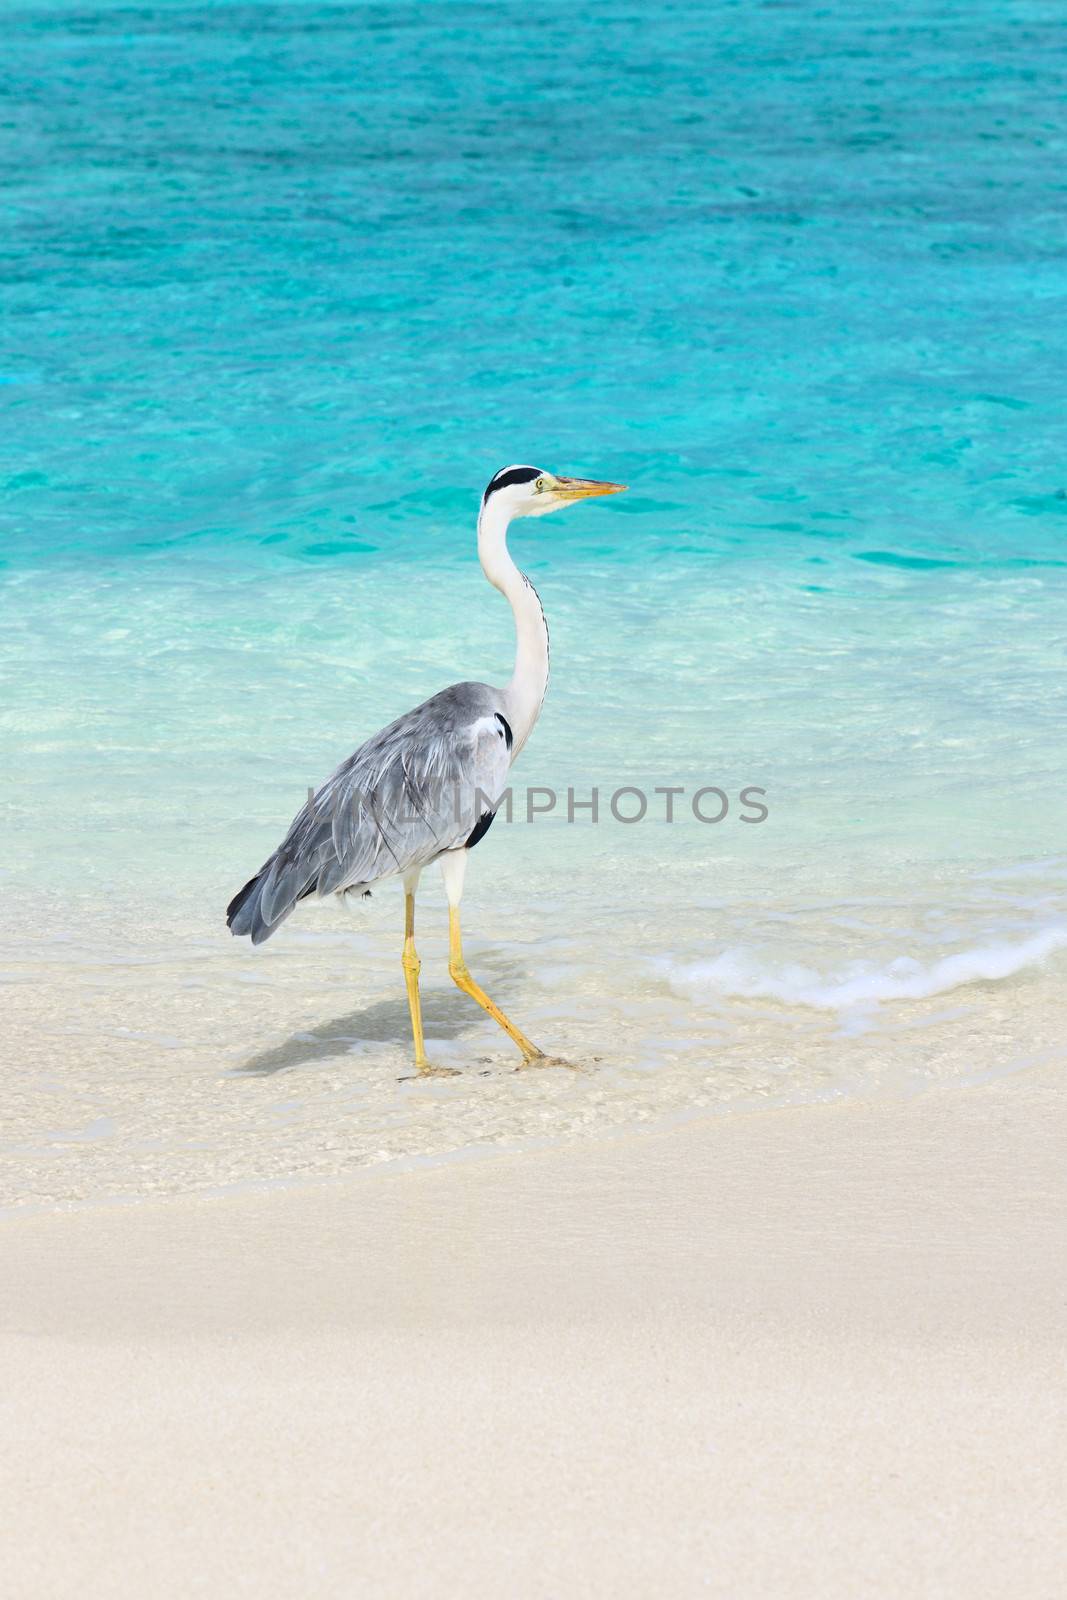 Heron at the beach by haveseen